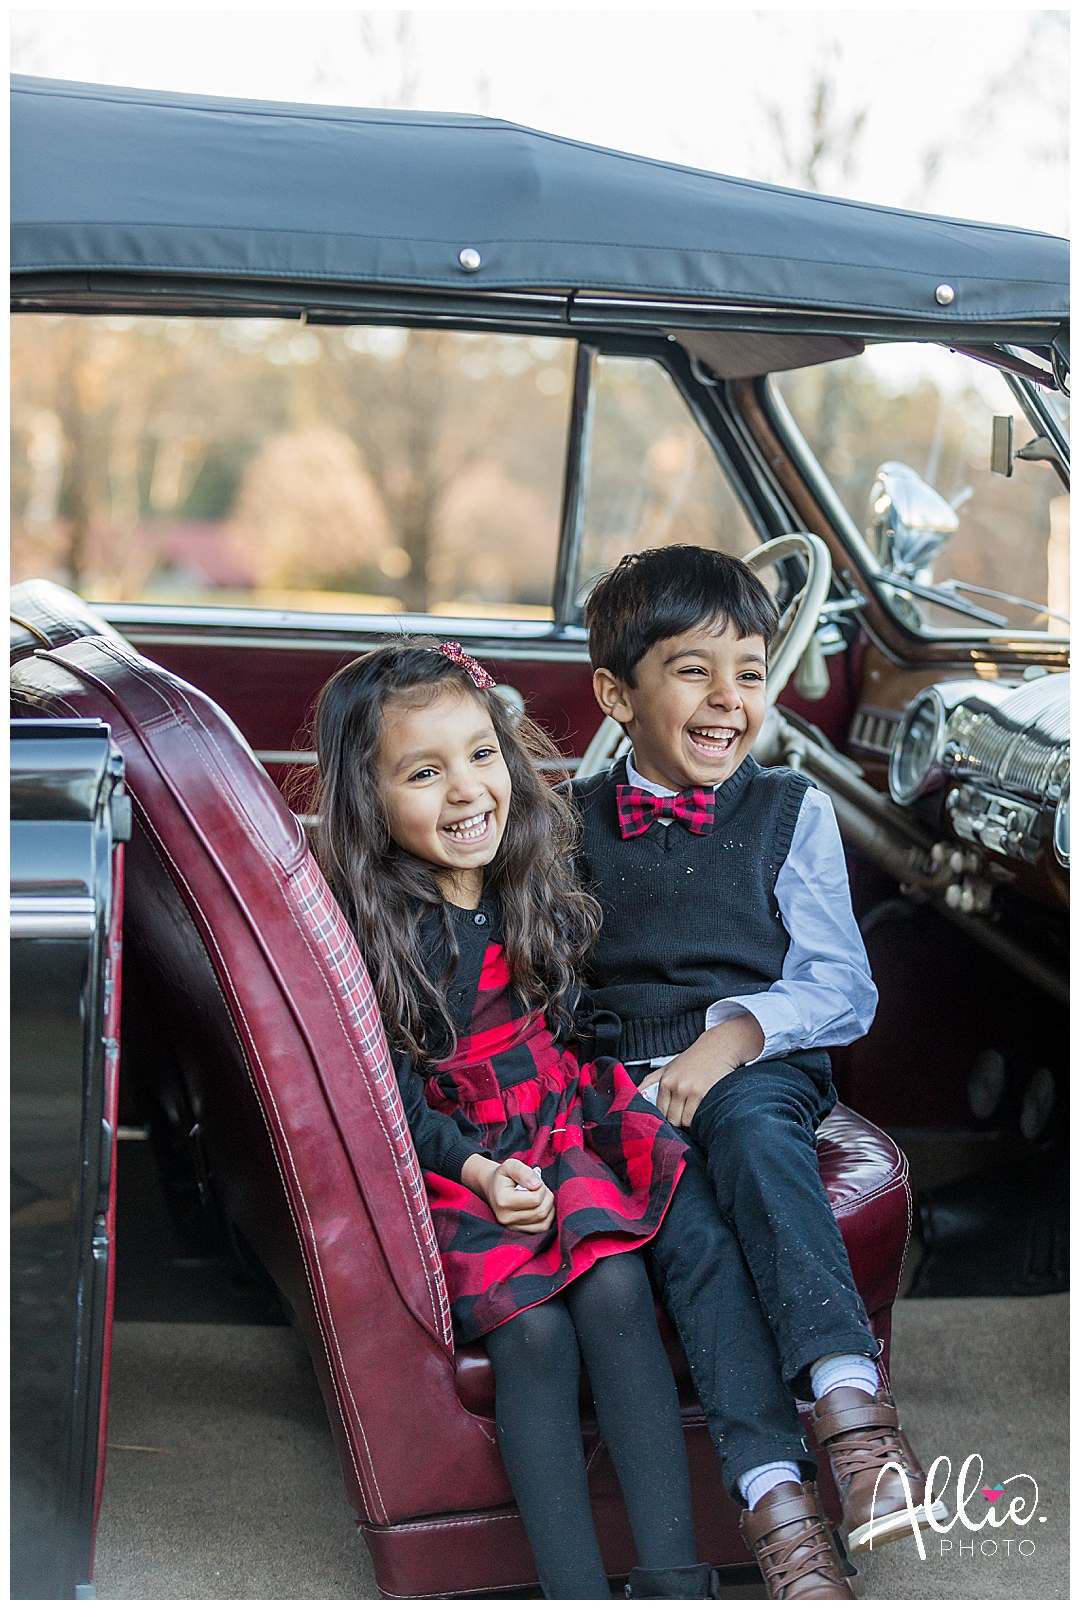 Vintage Car Christmas Mini Sessions by Allie.Photo.